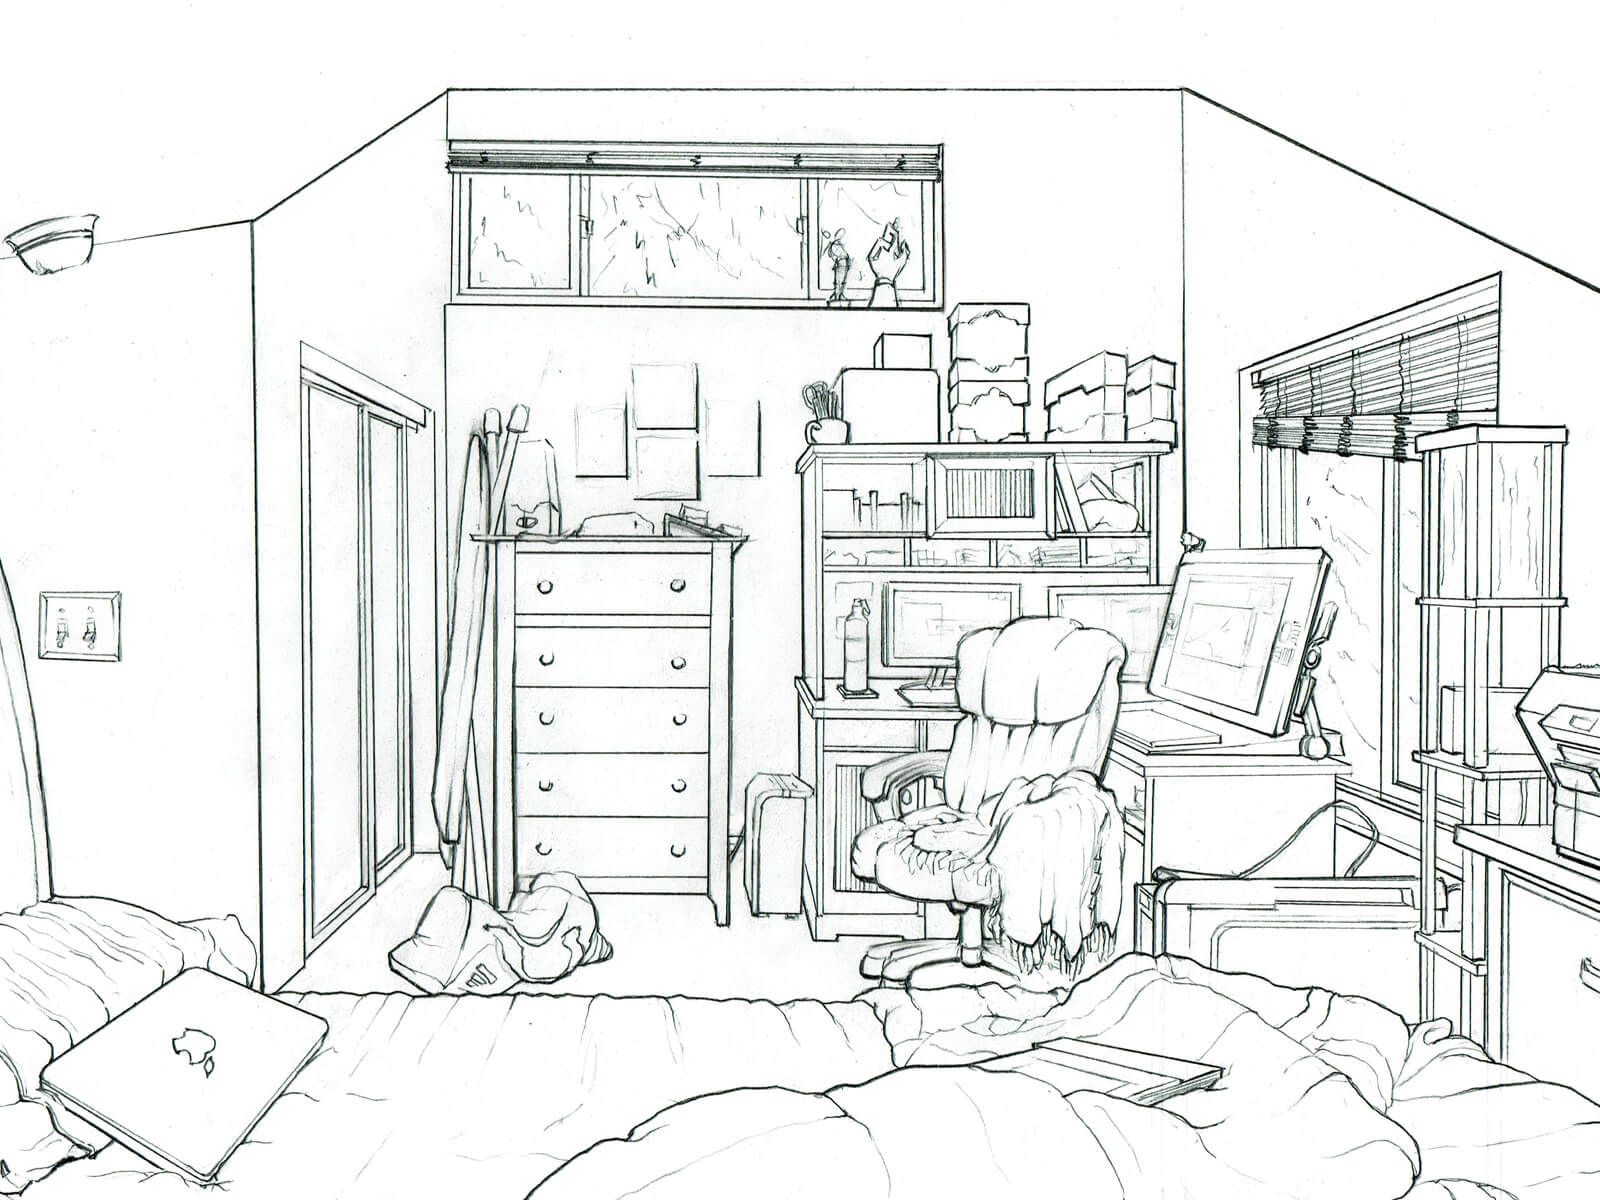 black and white persepctive drawing of a cozy bedroom with a dresser, desk with 3 computer monitors and unmade bed